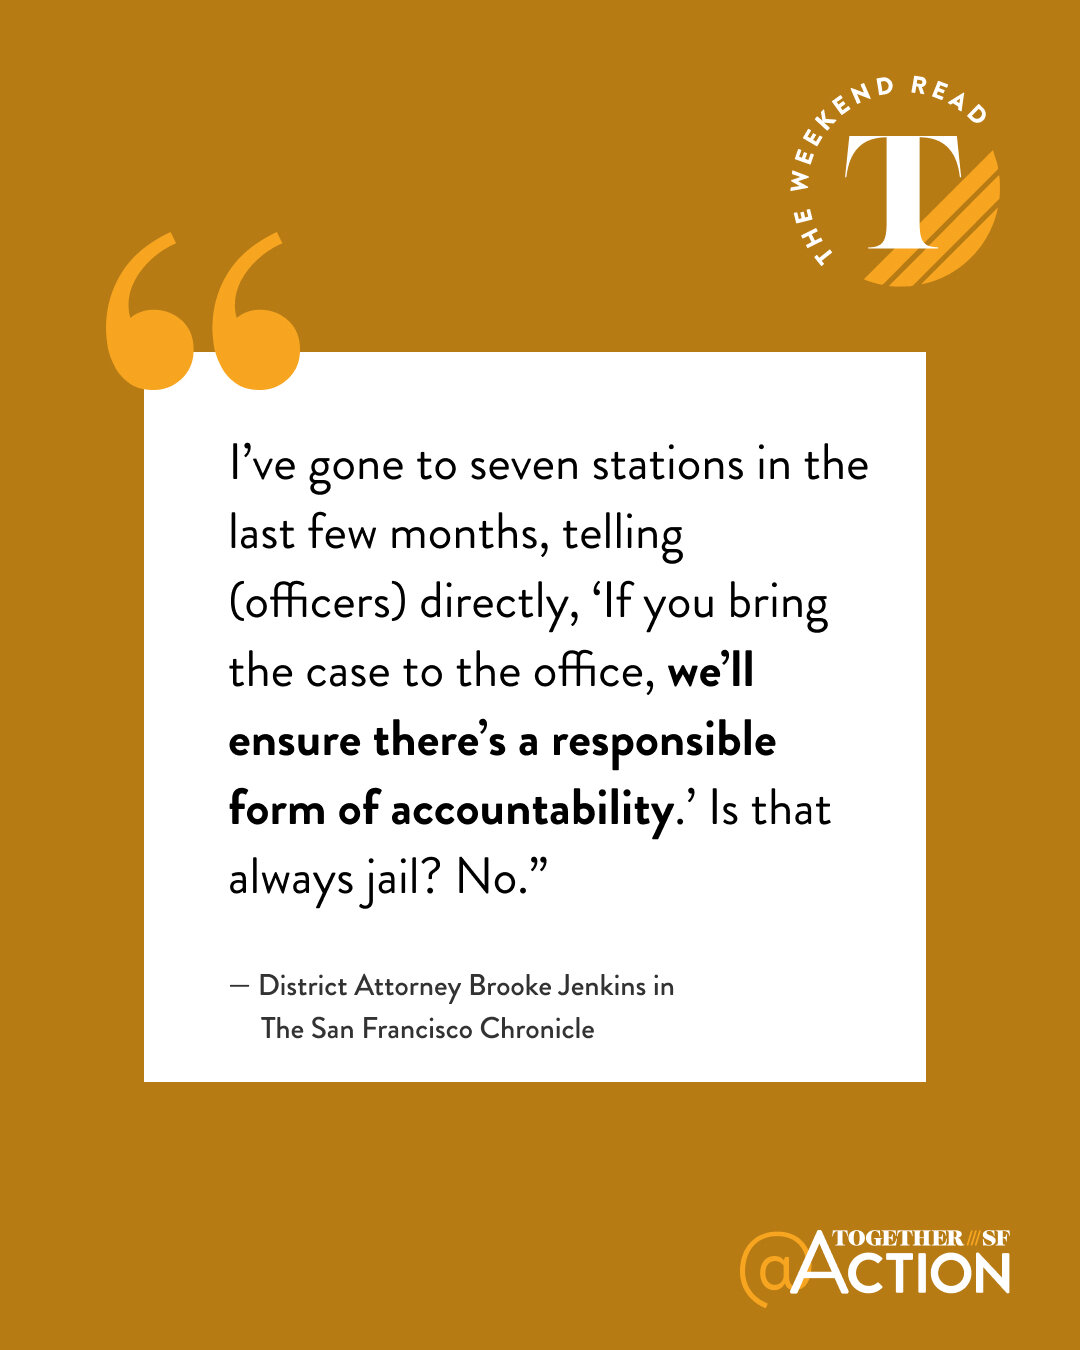 A new data deep dive from the @sfchronicle this week found that while it may be a while before we truly see the differences between @brookejenkins_sf and her predecessor&rsquo;s policies, one thing&rsquo;s for sure: arrests are up. Arrests don&rsquo;